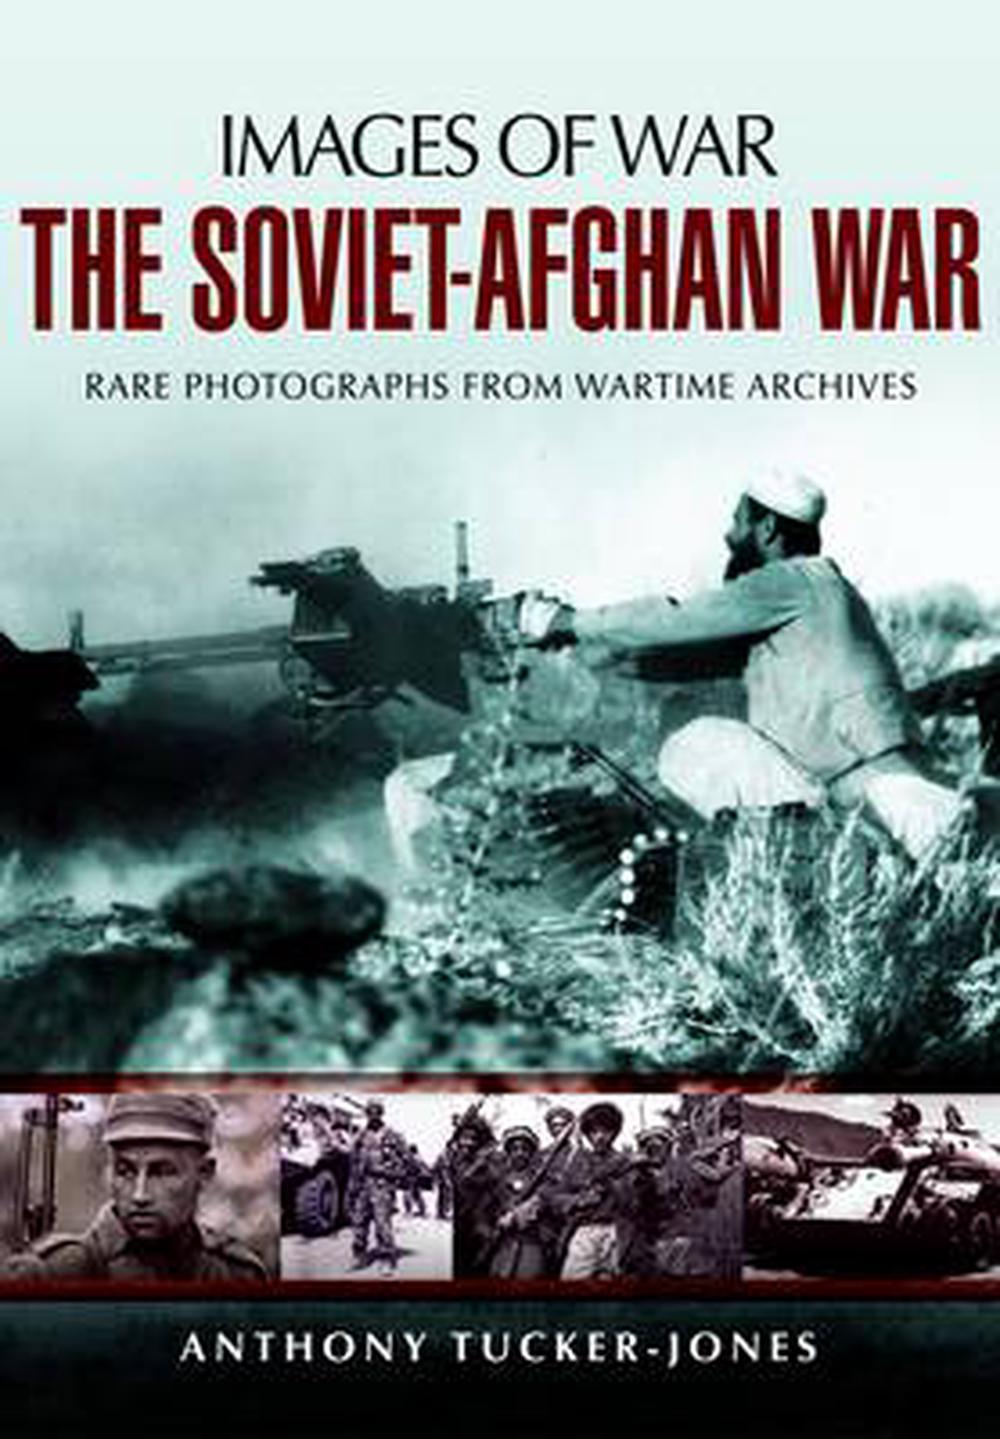 why is the soviet afghan war called the cold war